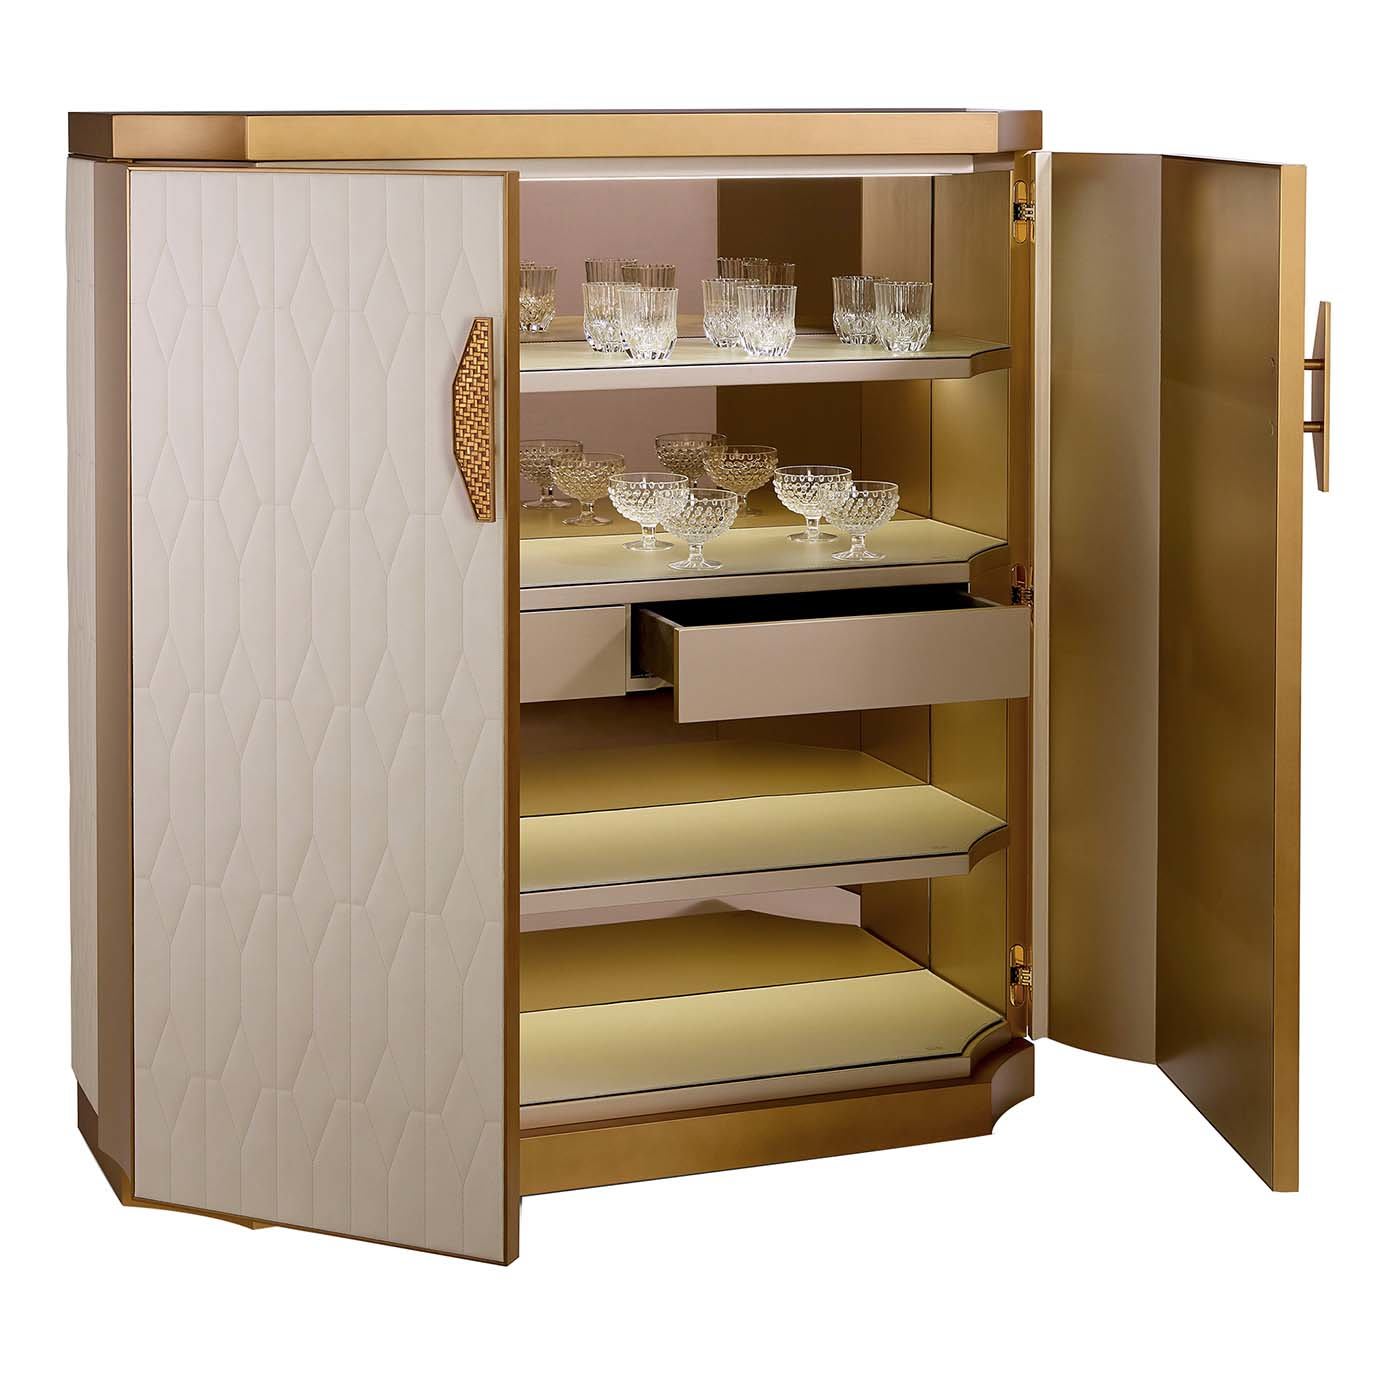 Savoy cabinet with bronzed backing - Sicis